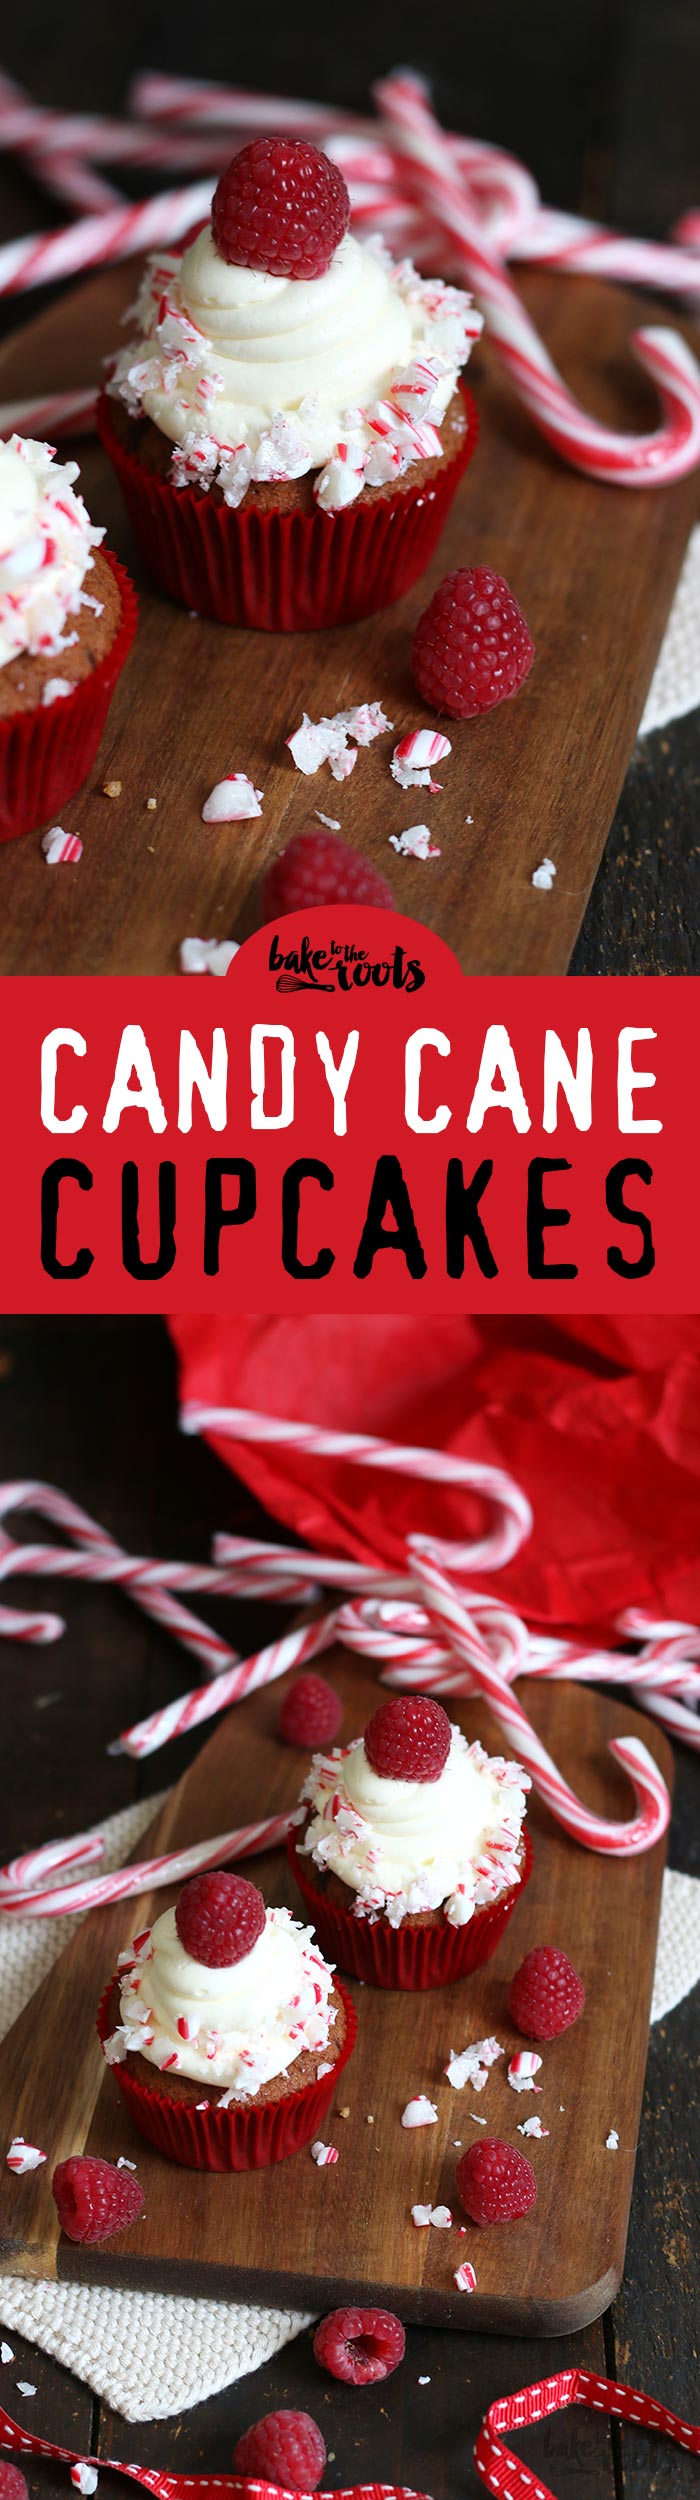 Delicious Chocolate Cupcakes with a raspberry filling, vanilla buttercream and a candy cane decoration - perfect for Christmas | Bake to the roots